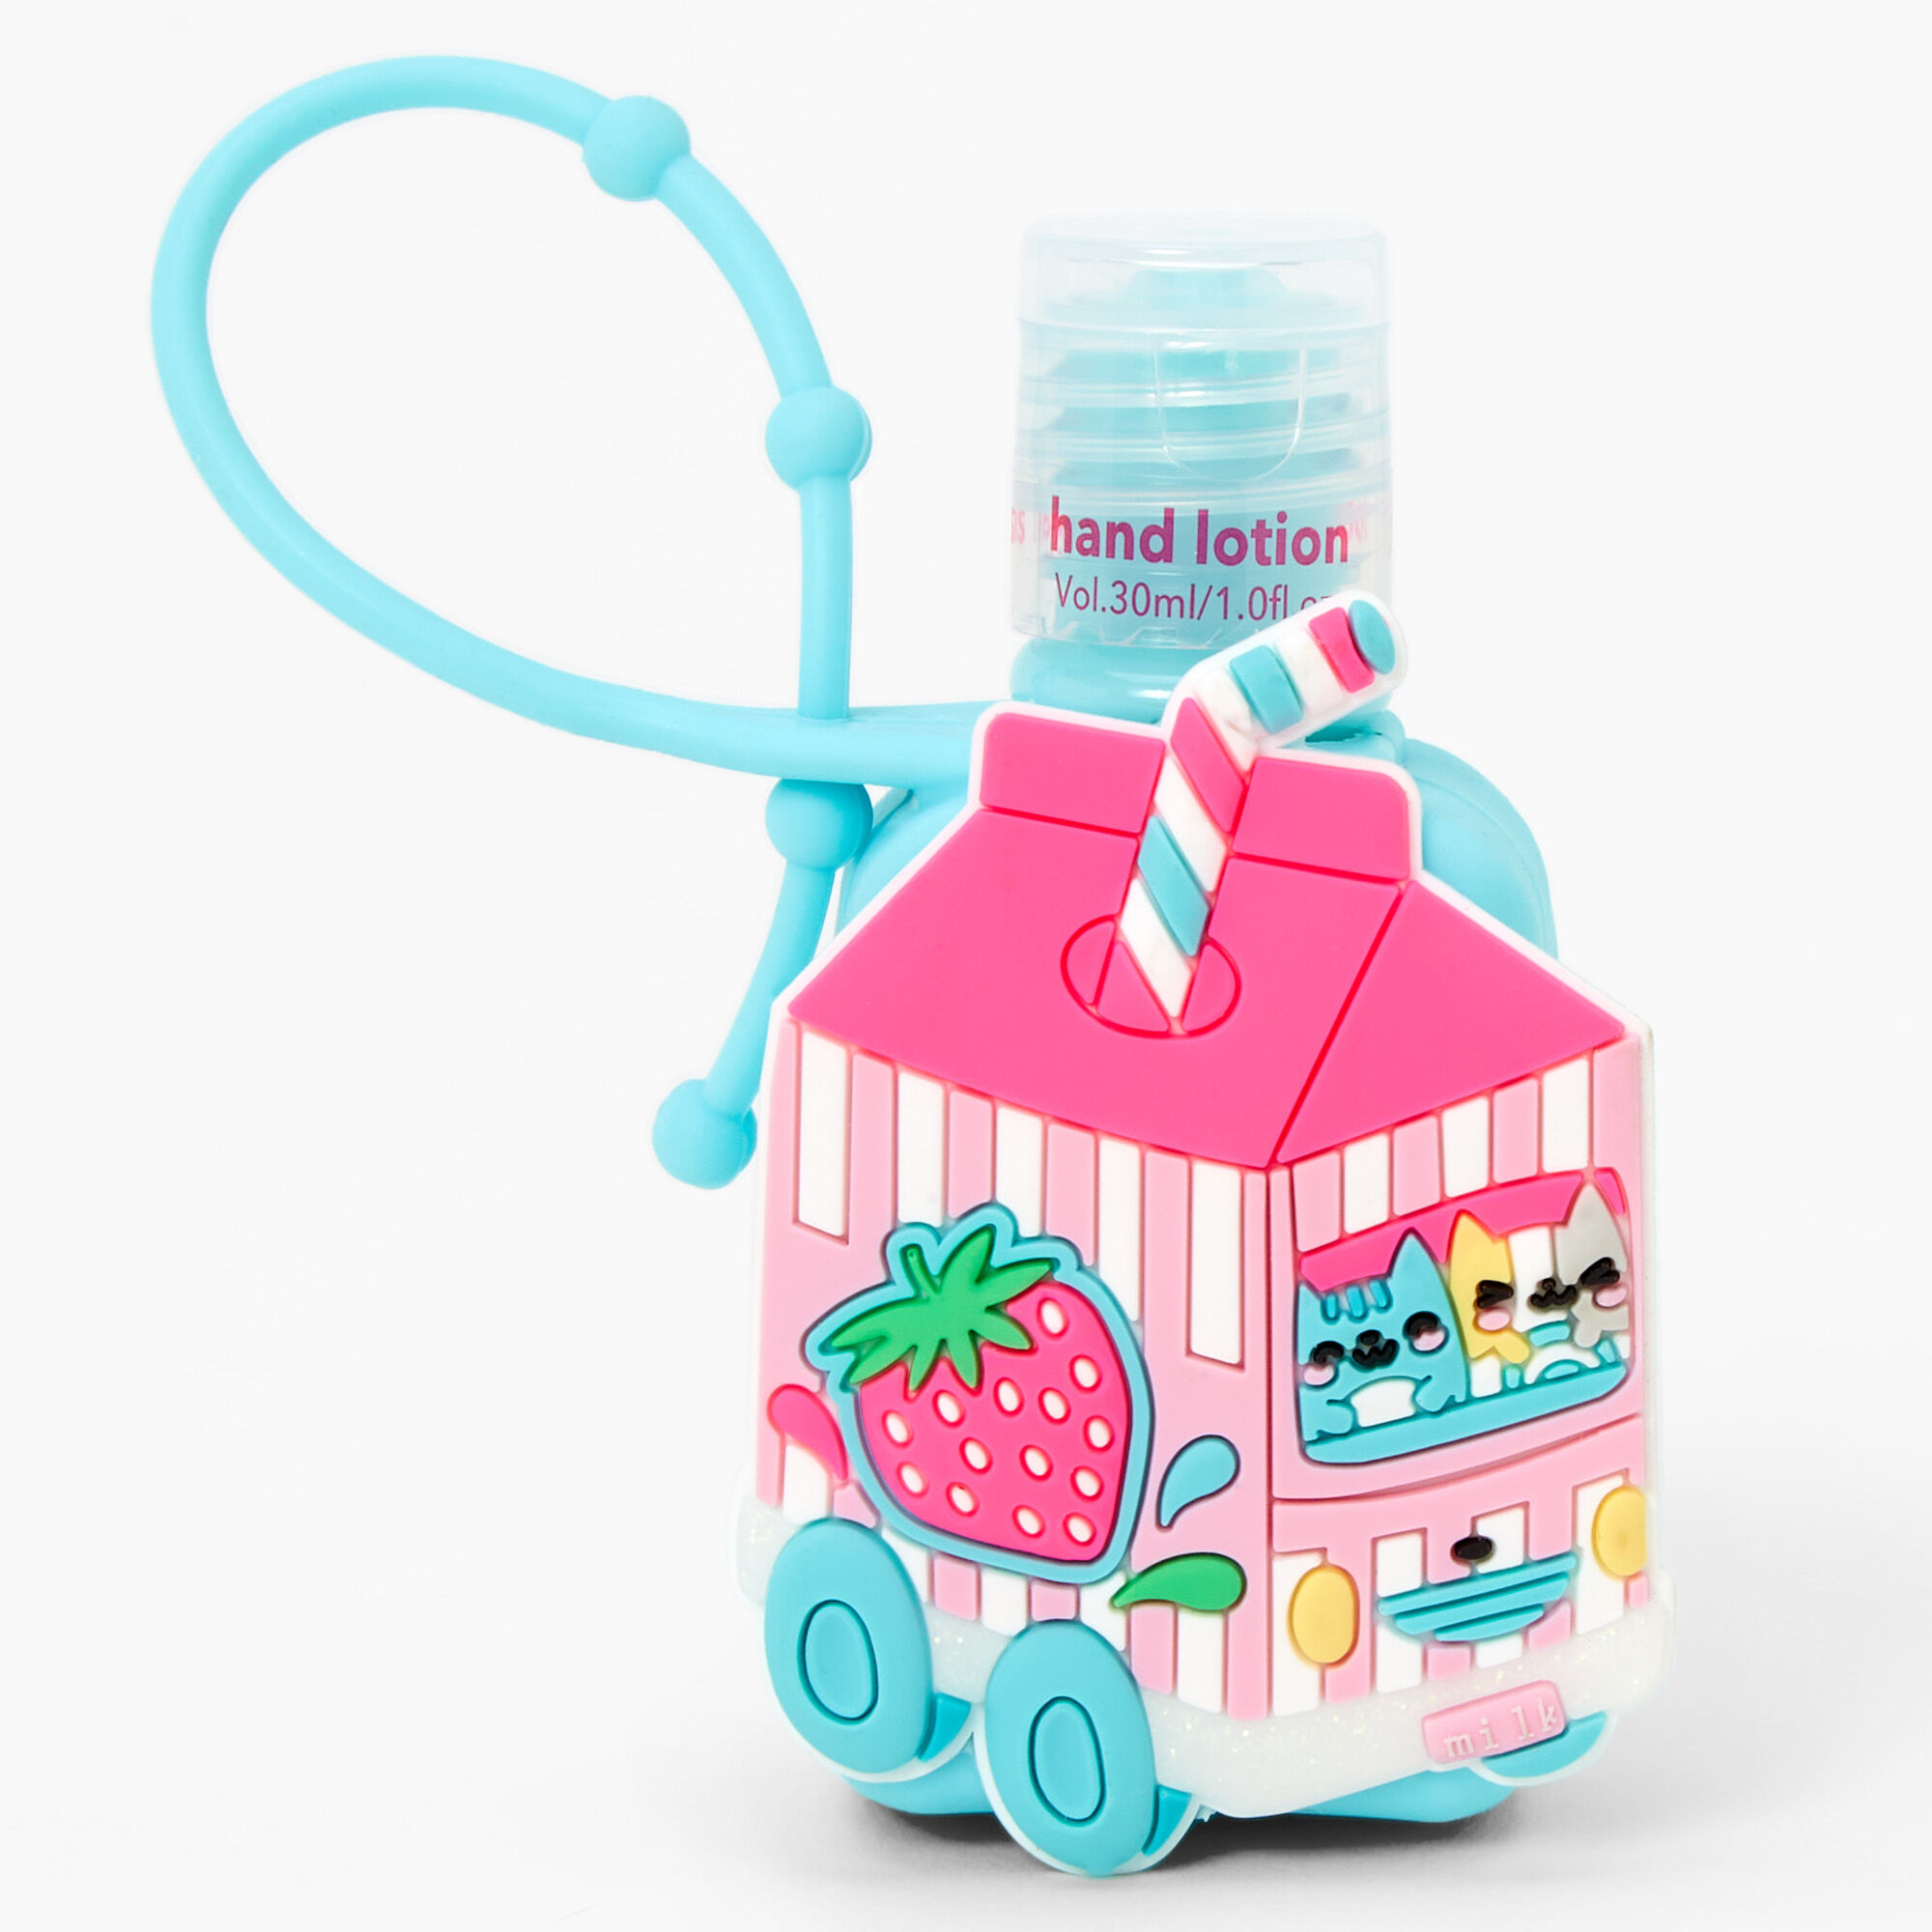 View Claires Milk Truck Cat Hand Lotion information